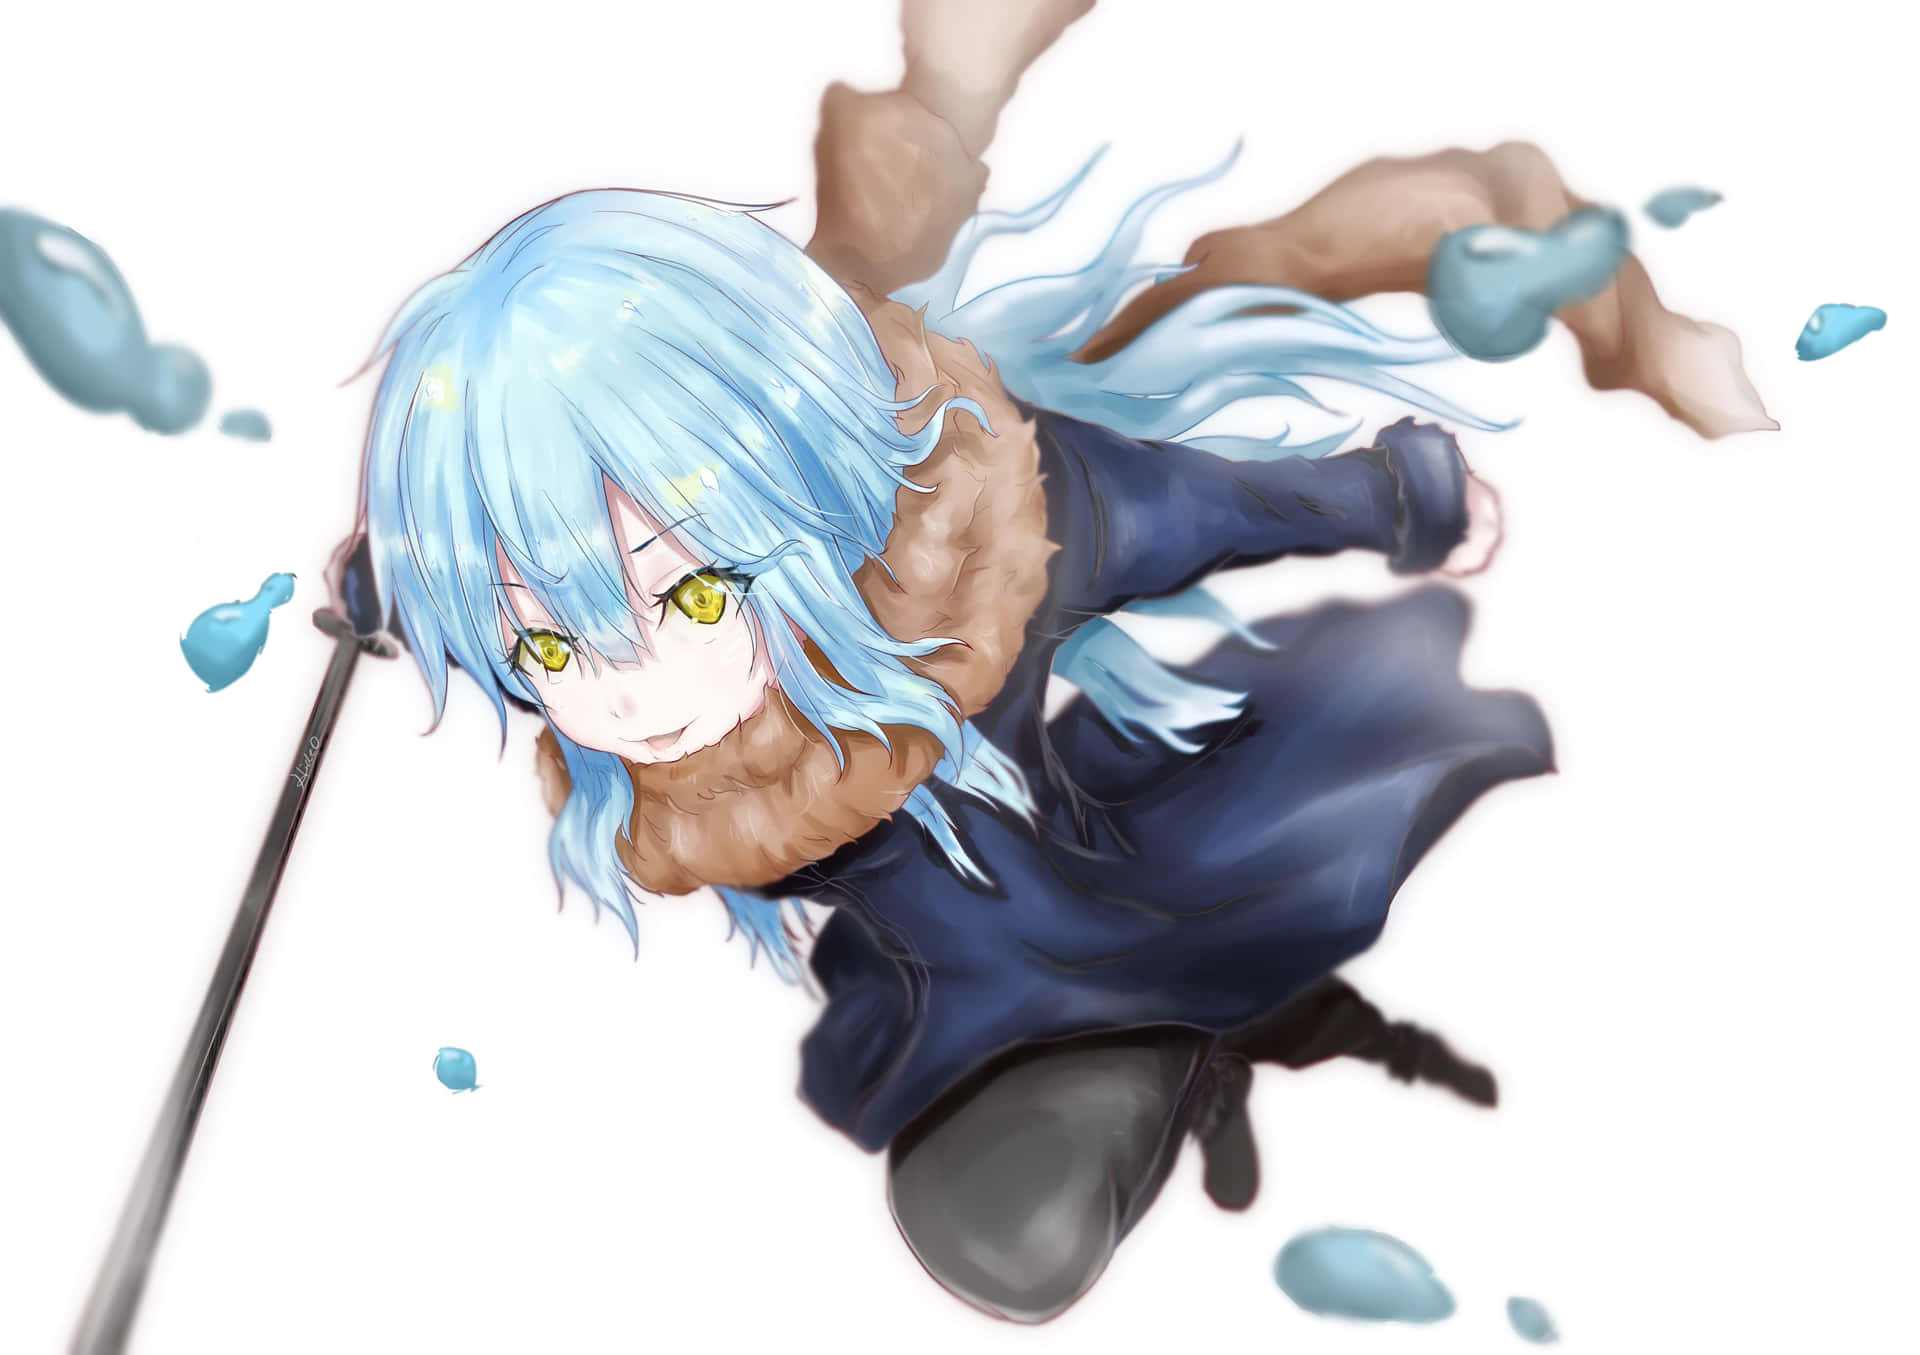 Rimuru, The Tactician from "That Time I Got Reincarnated As A Slime"